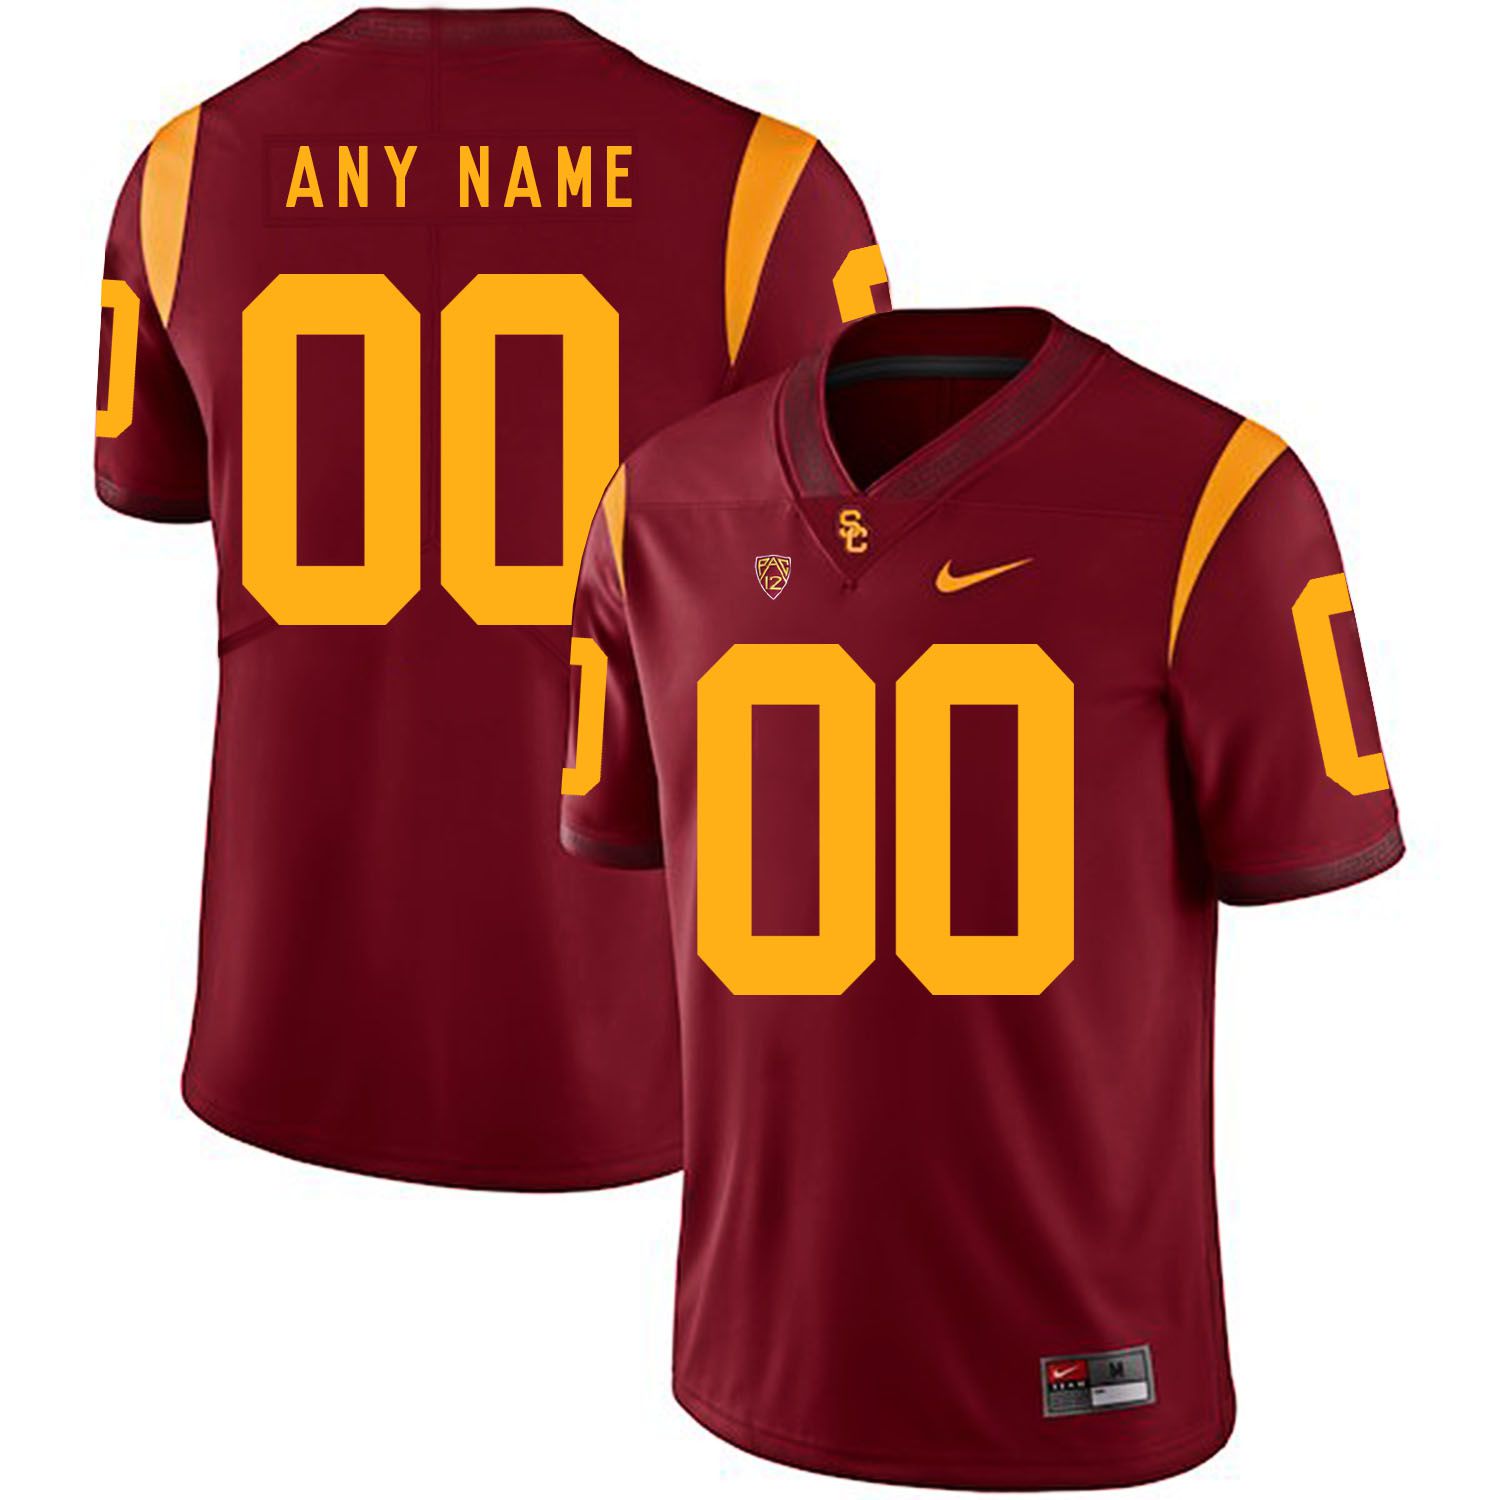 Men USC Trojans #00 Any Name Red Customized NCAA Jerseys->customized ncaa jersey->Custom Jersey